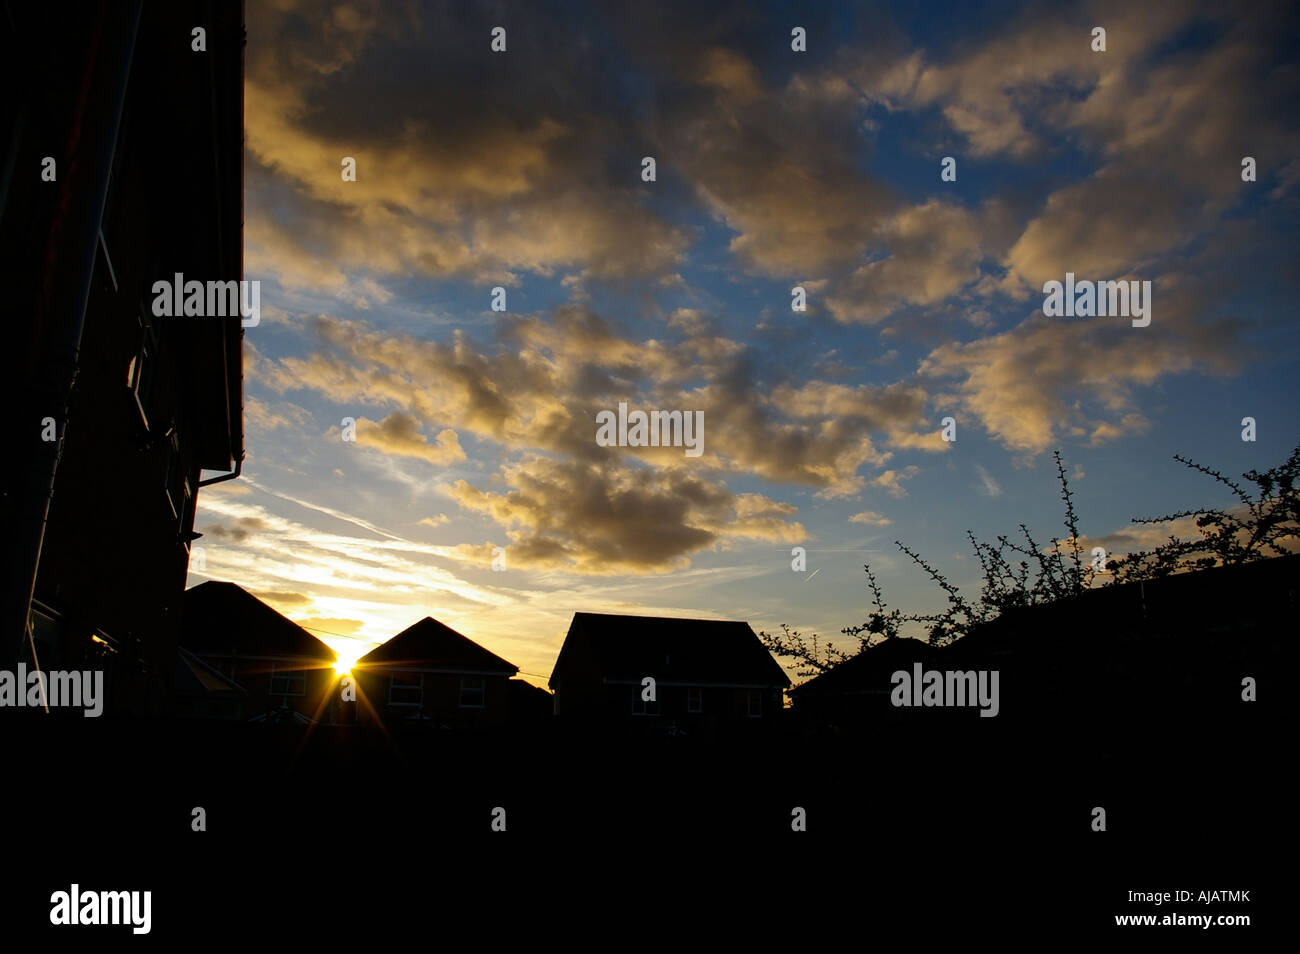 sun setting over a suburban rooftop with cloudy skies cloudy sky Stock Photo